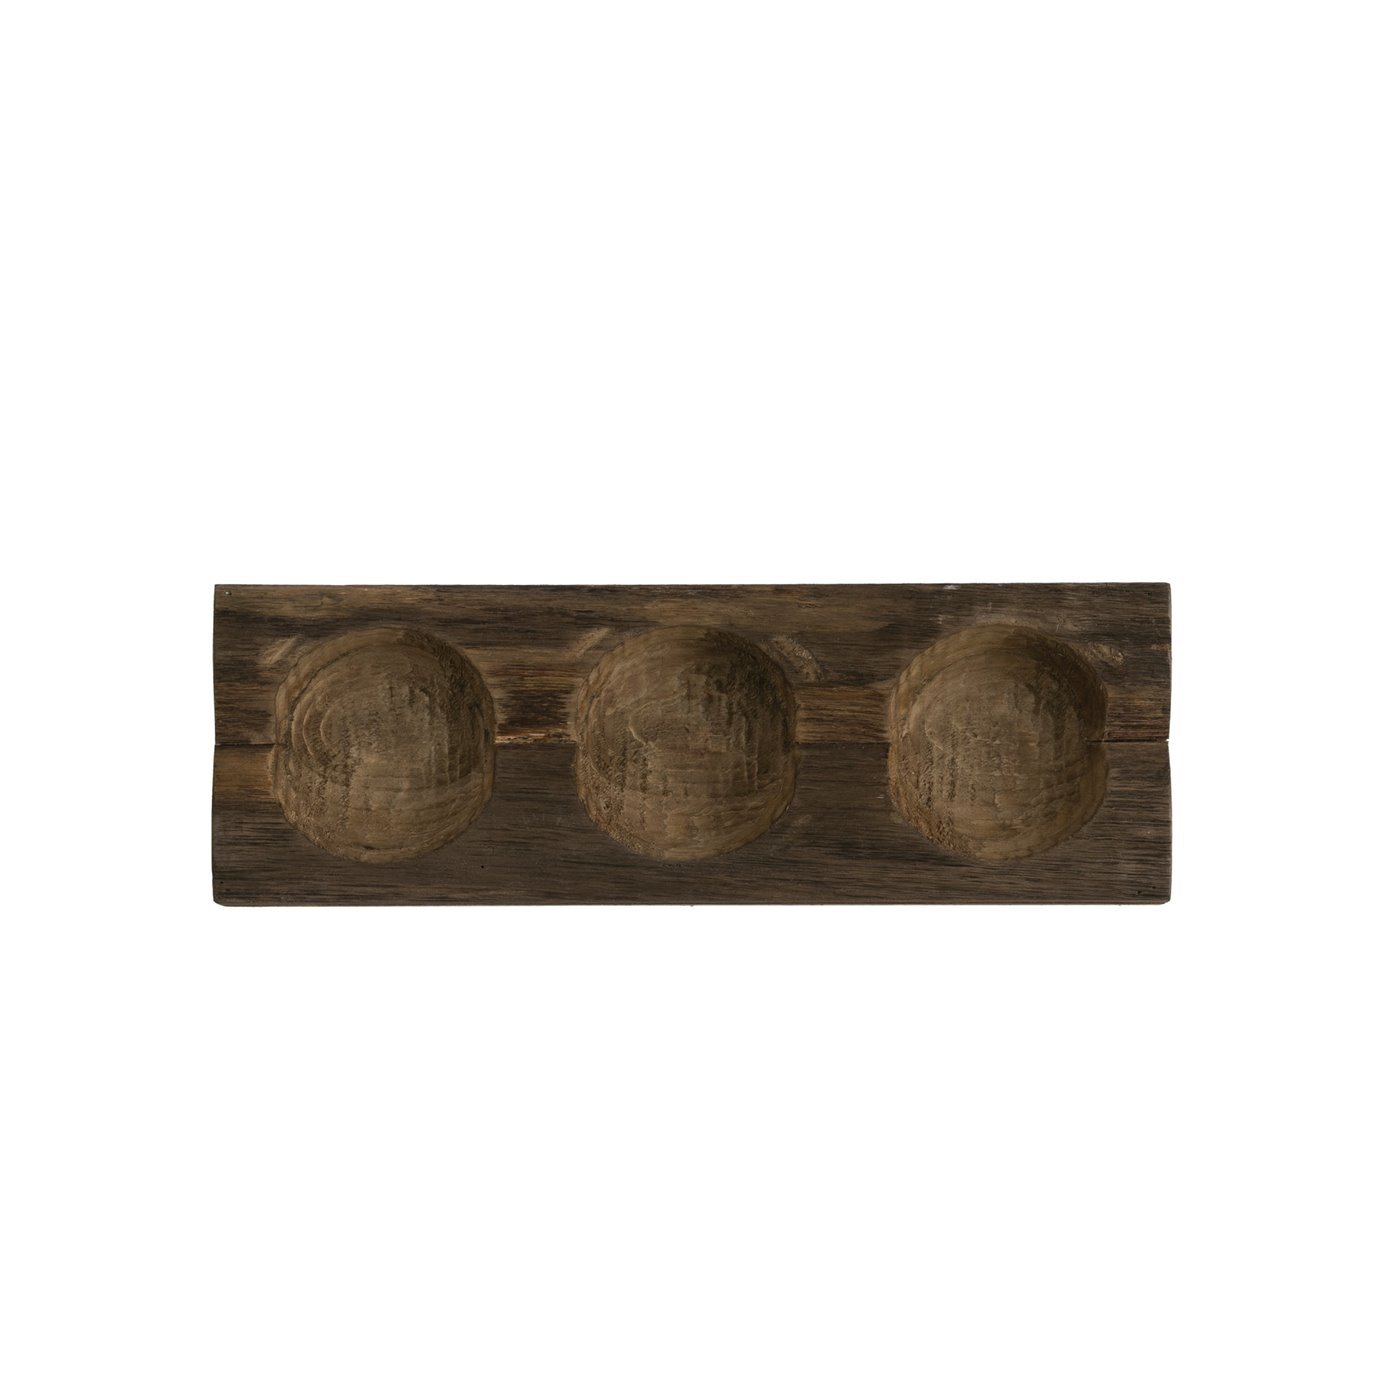 Decorative 3-Section Wood Tray